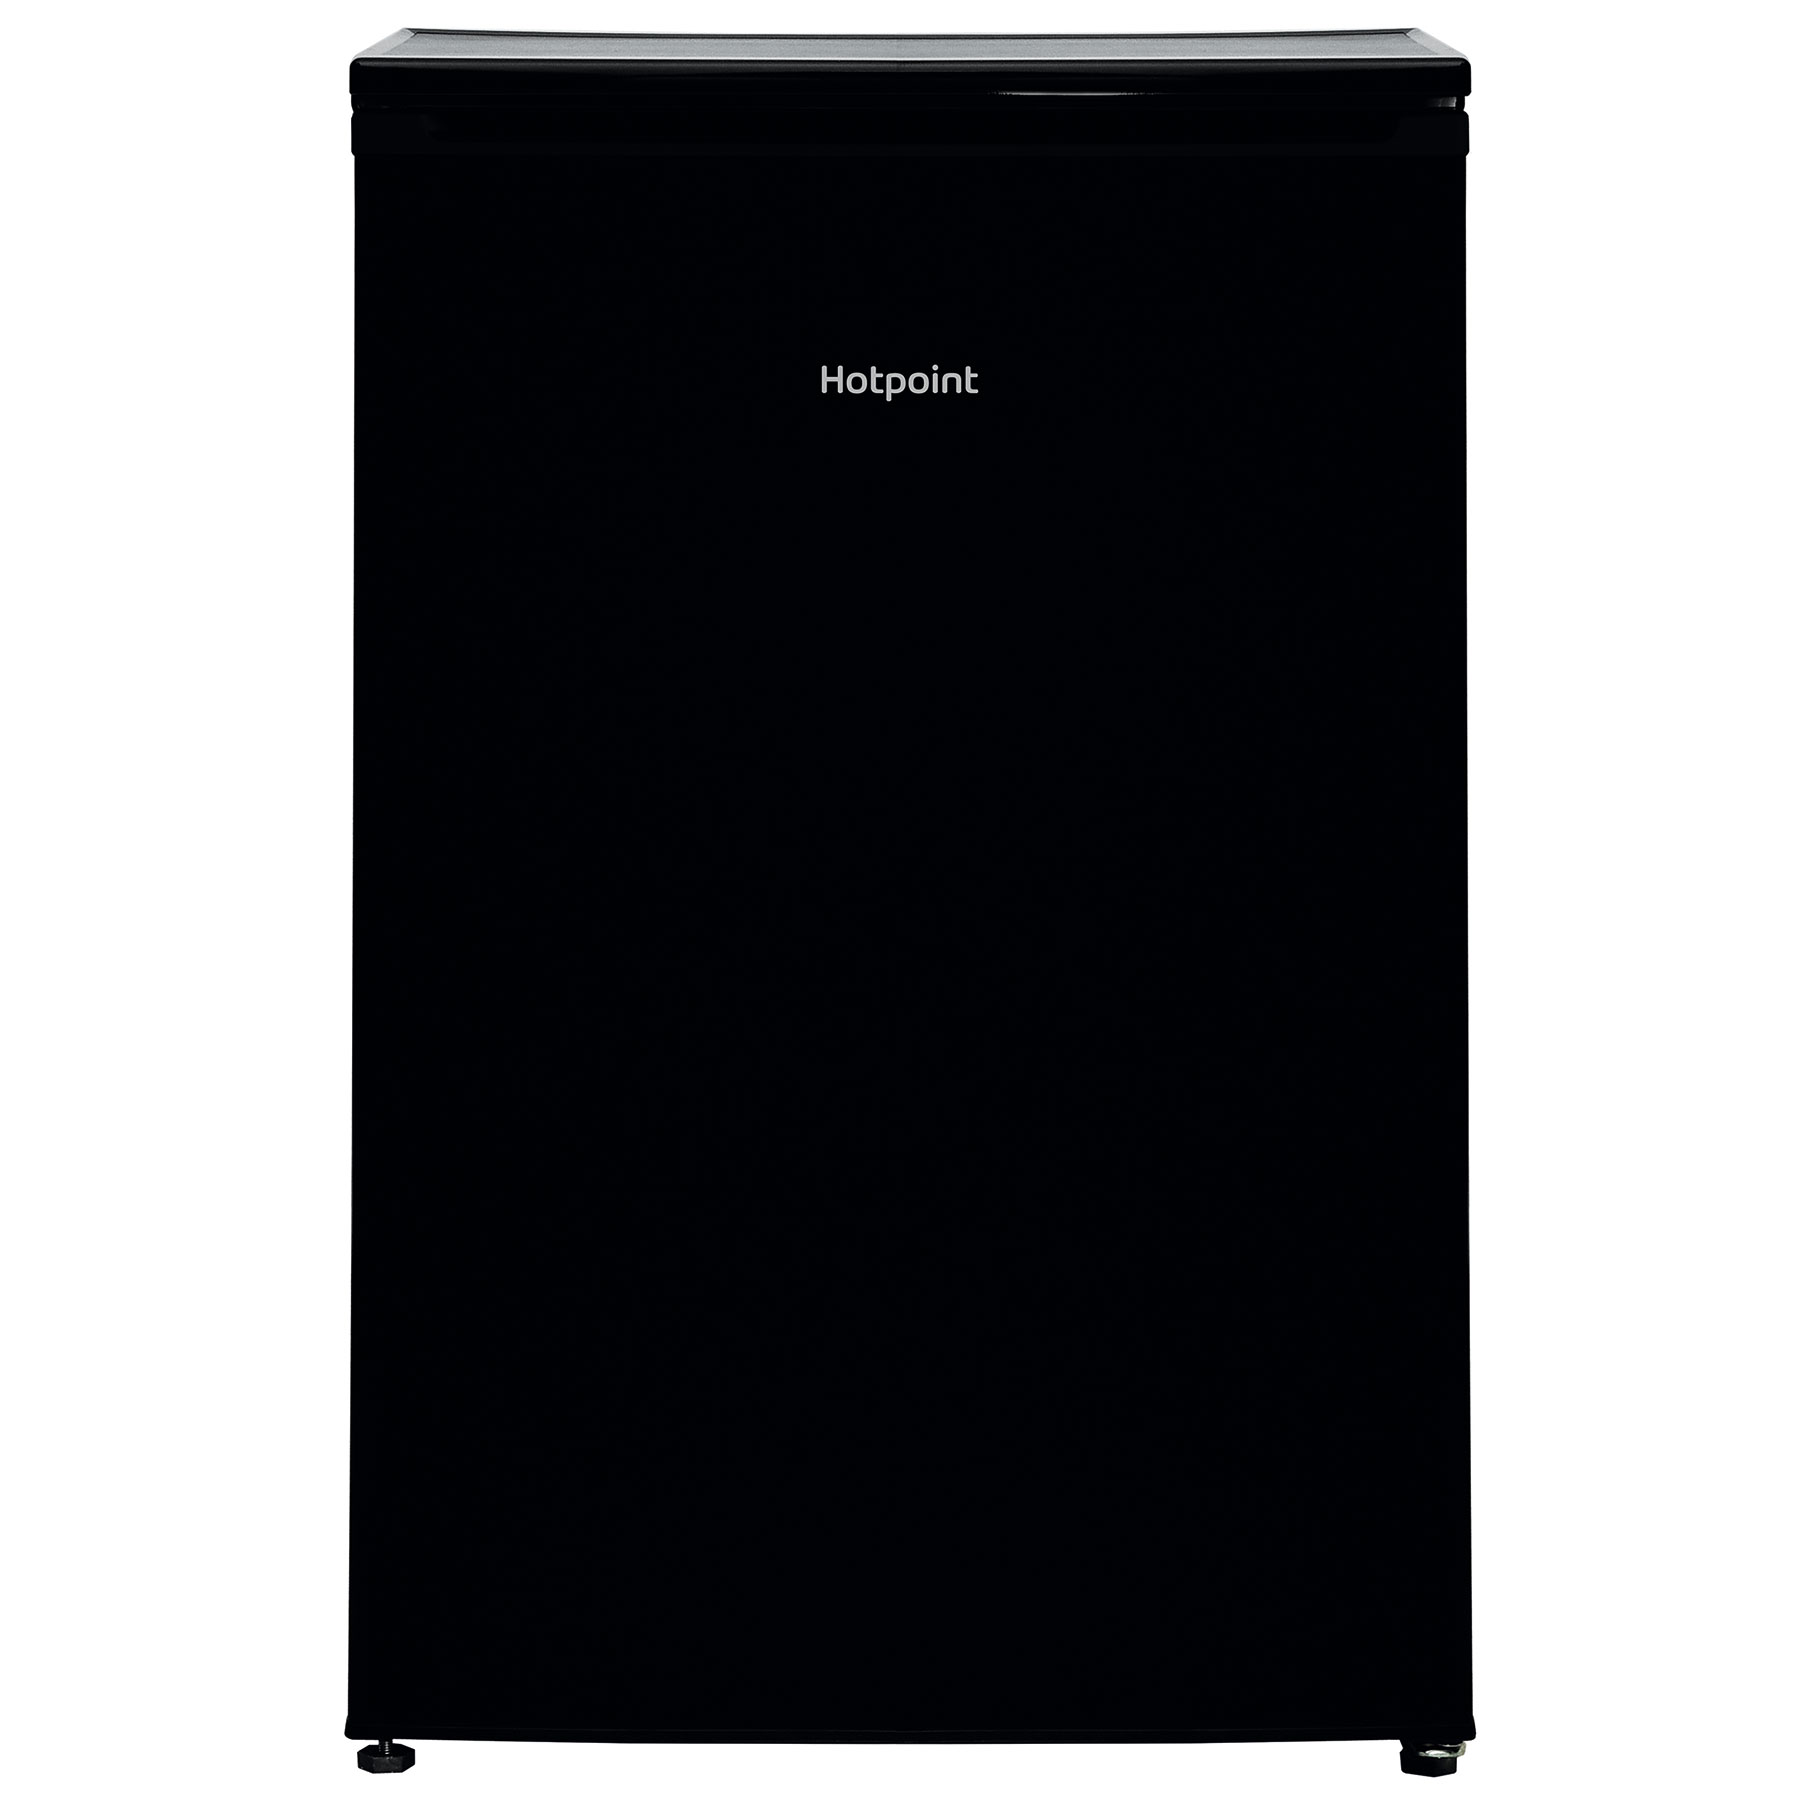 Image of Hotpoint H55ZM1120BUK 55cm Undercounter Freezer in Black E Rated 103L